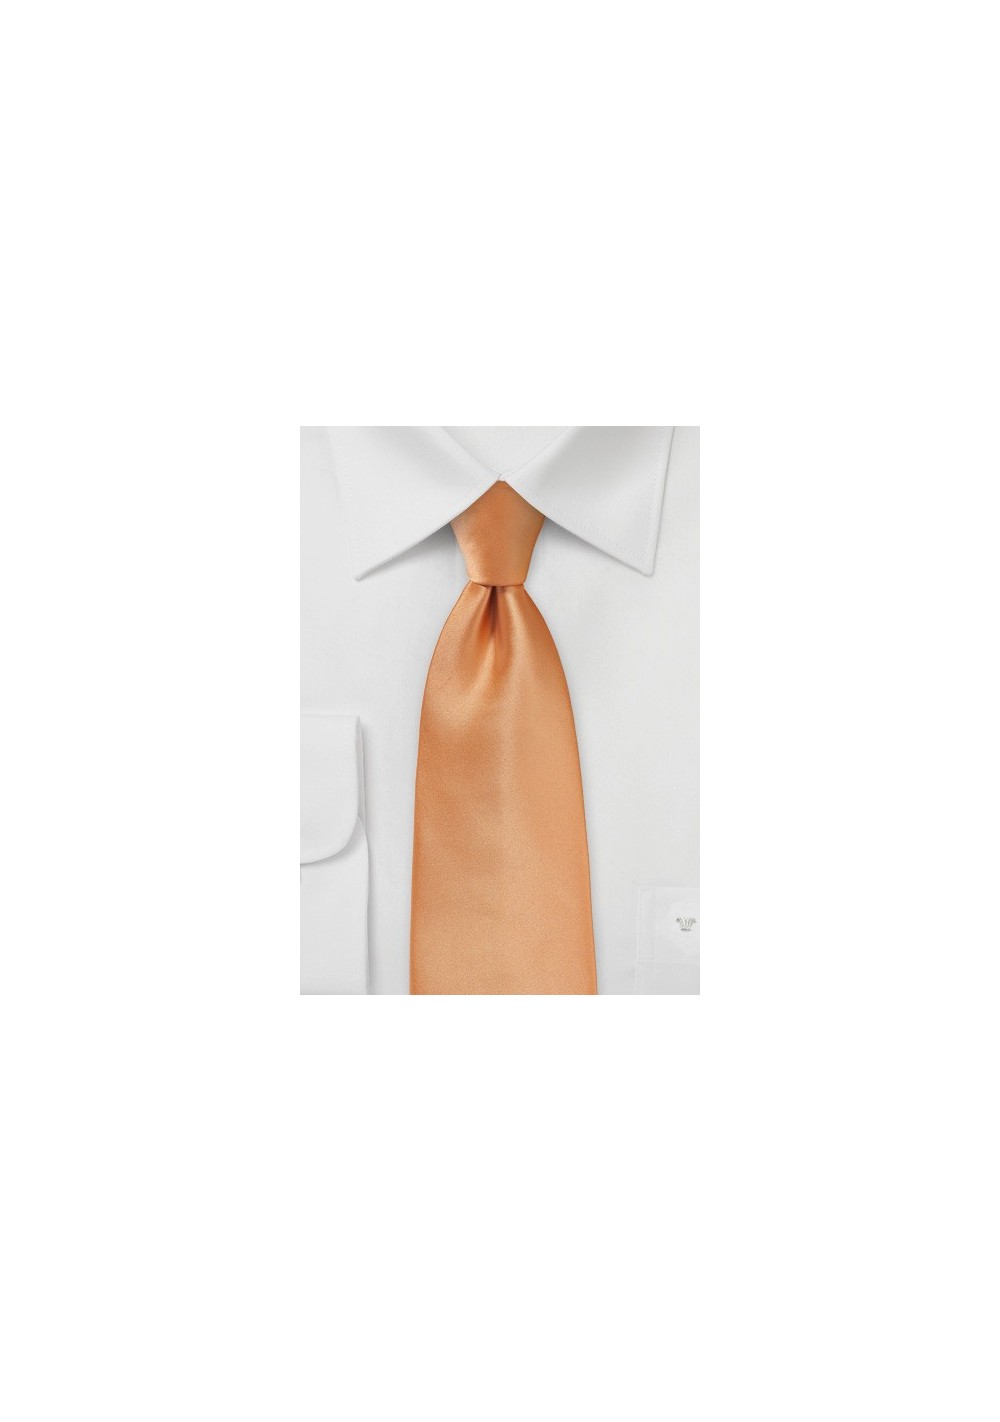 Solid Apricot Tie in Kids Length